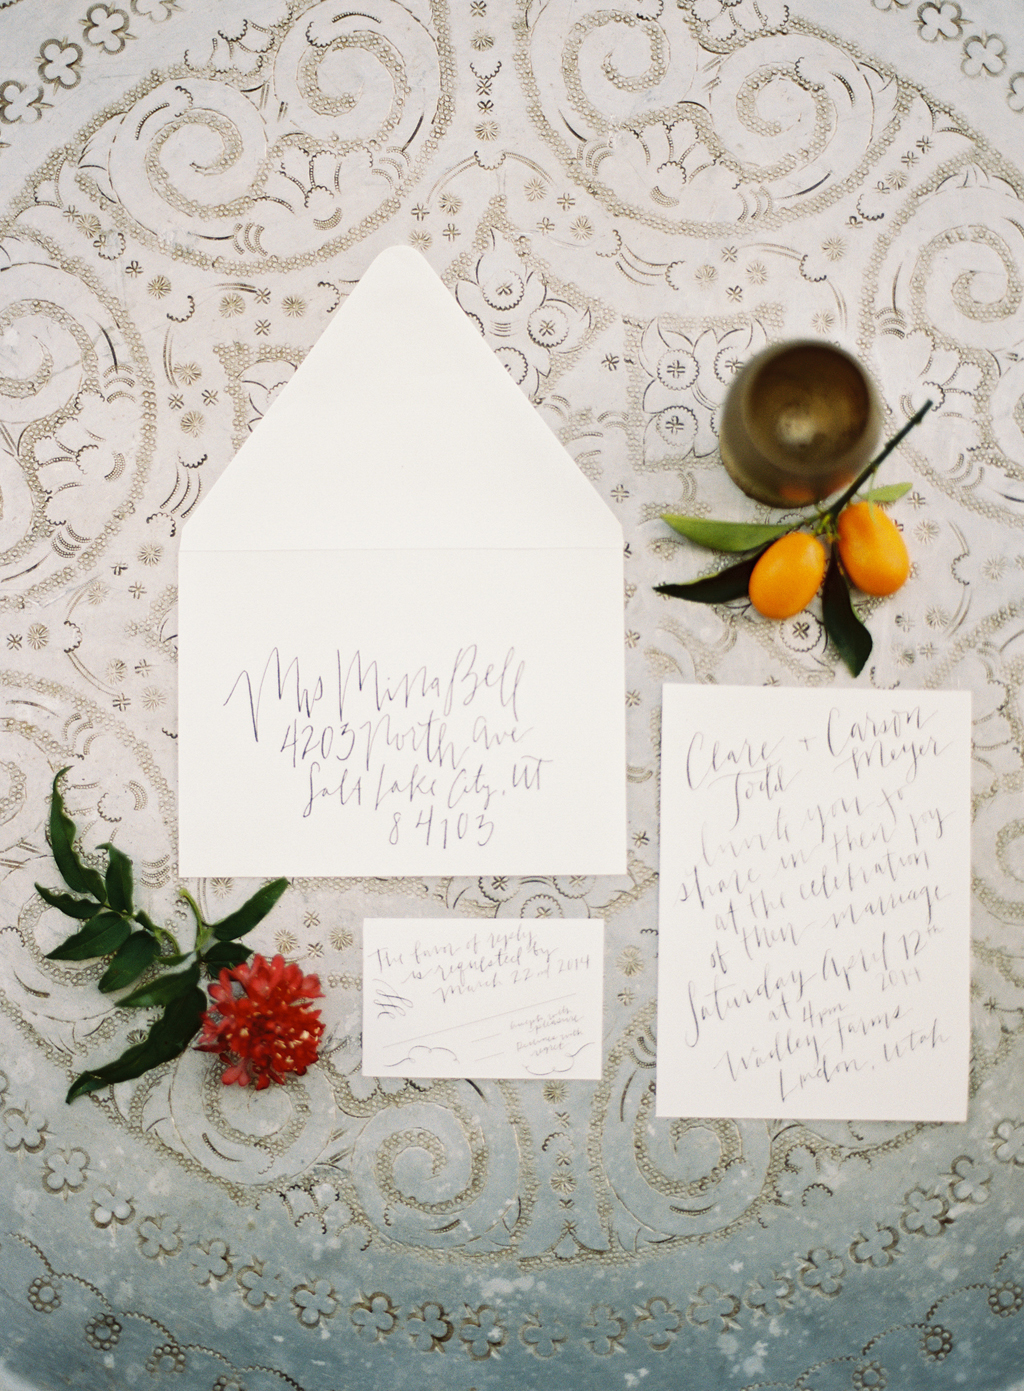 a wedding invitation suite with calligraphy by tessa shane